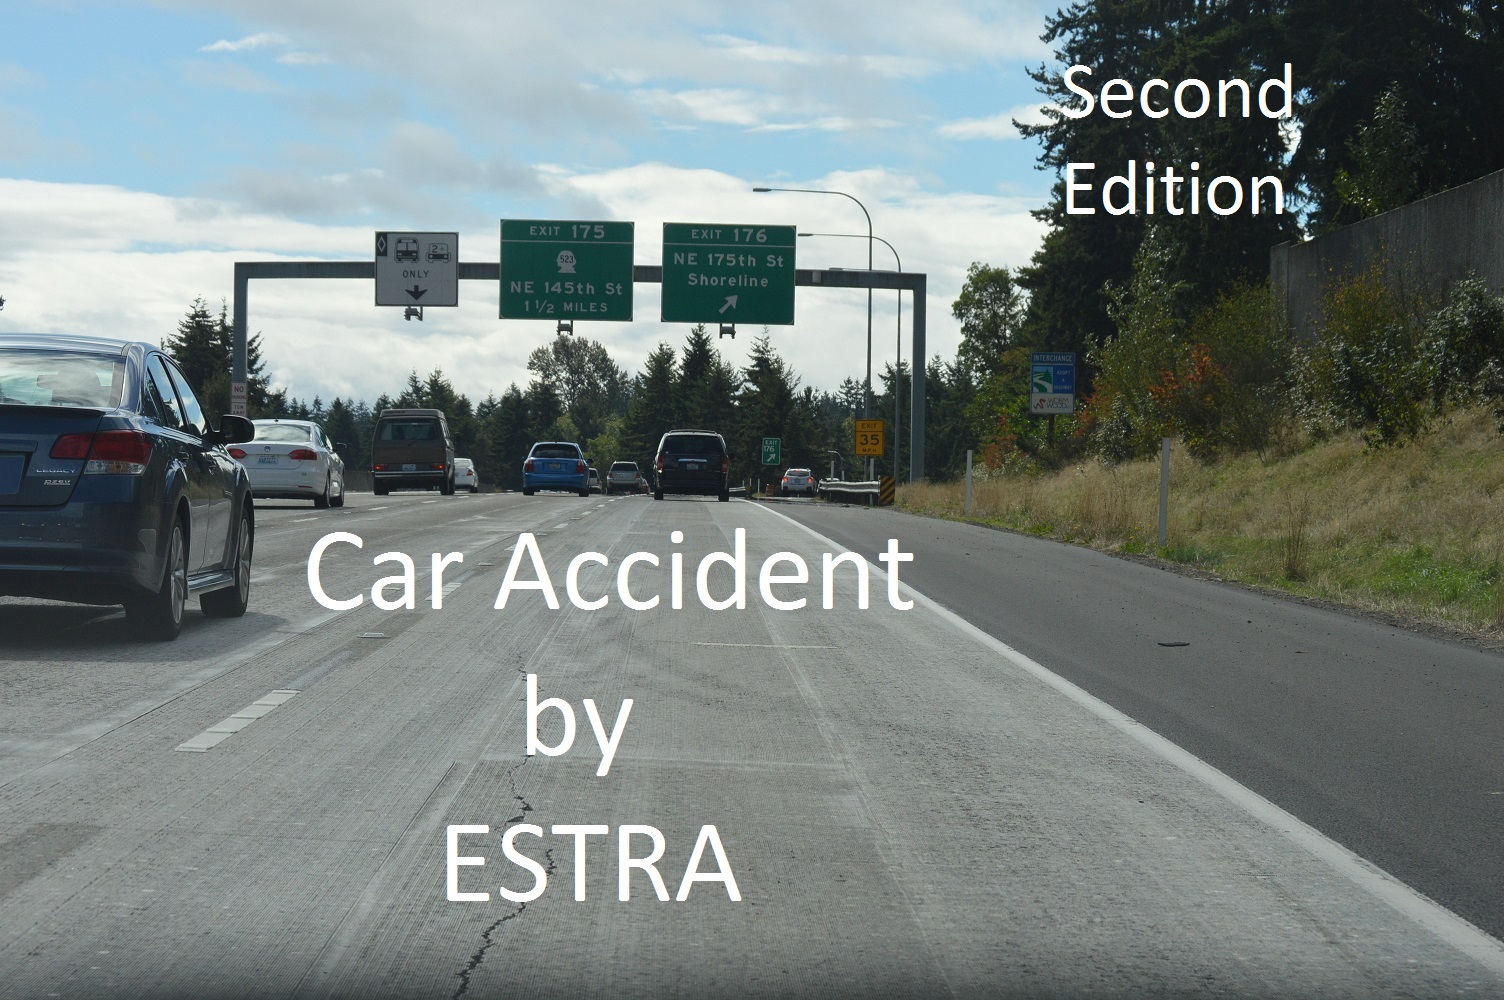 Book Car Accident by ESTRA, Second Edition. Pre-order today at ESTRA Official Car Accident Site. 